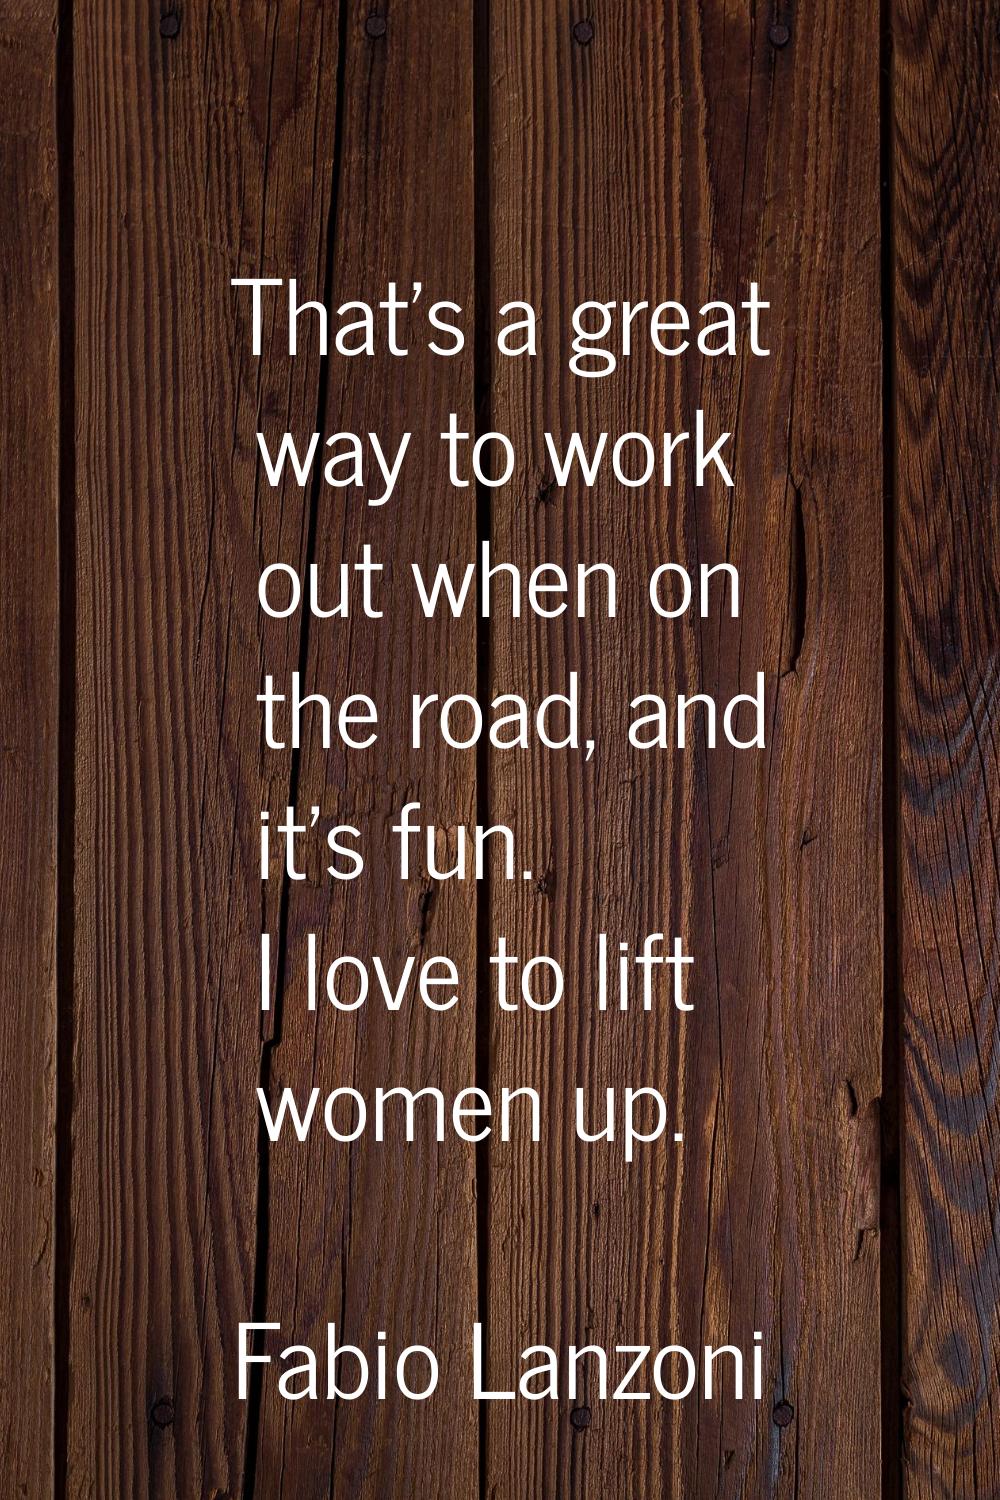 That's a great way to work out when on the road, and it's fun. I love to lift women up.